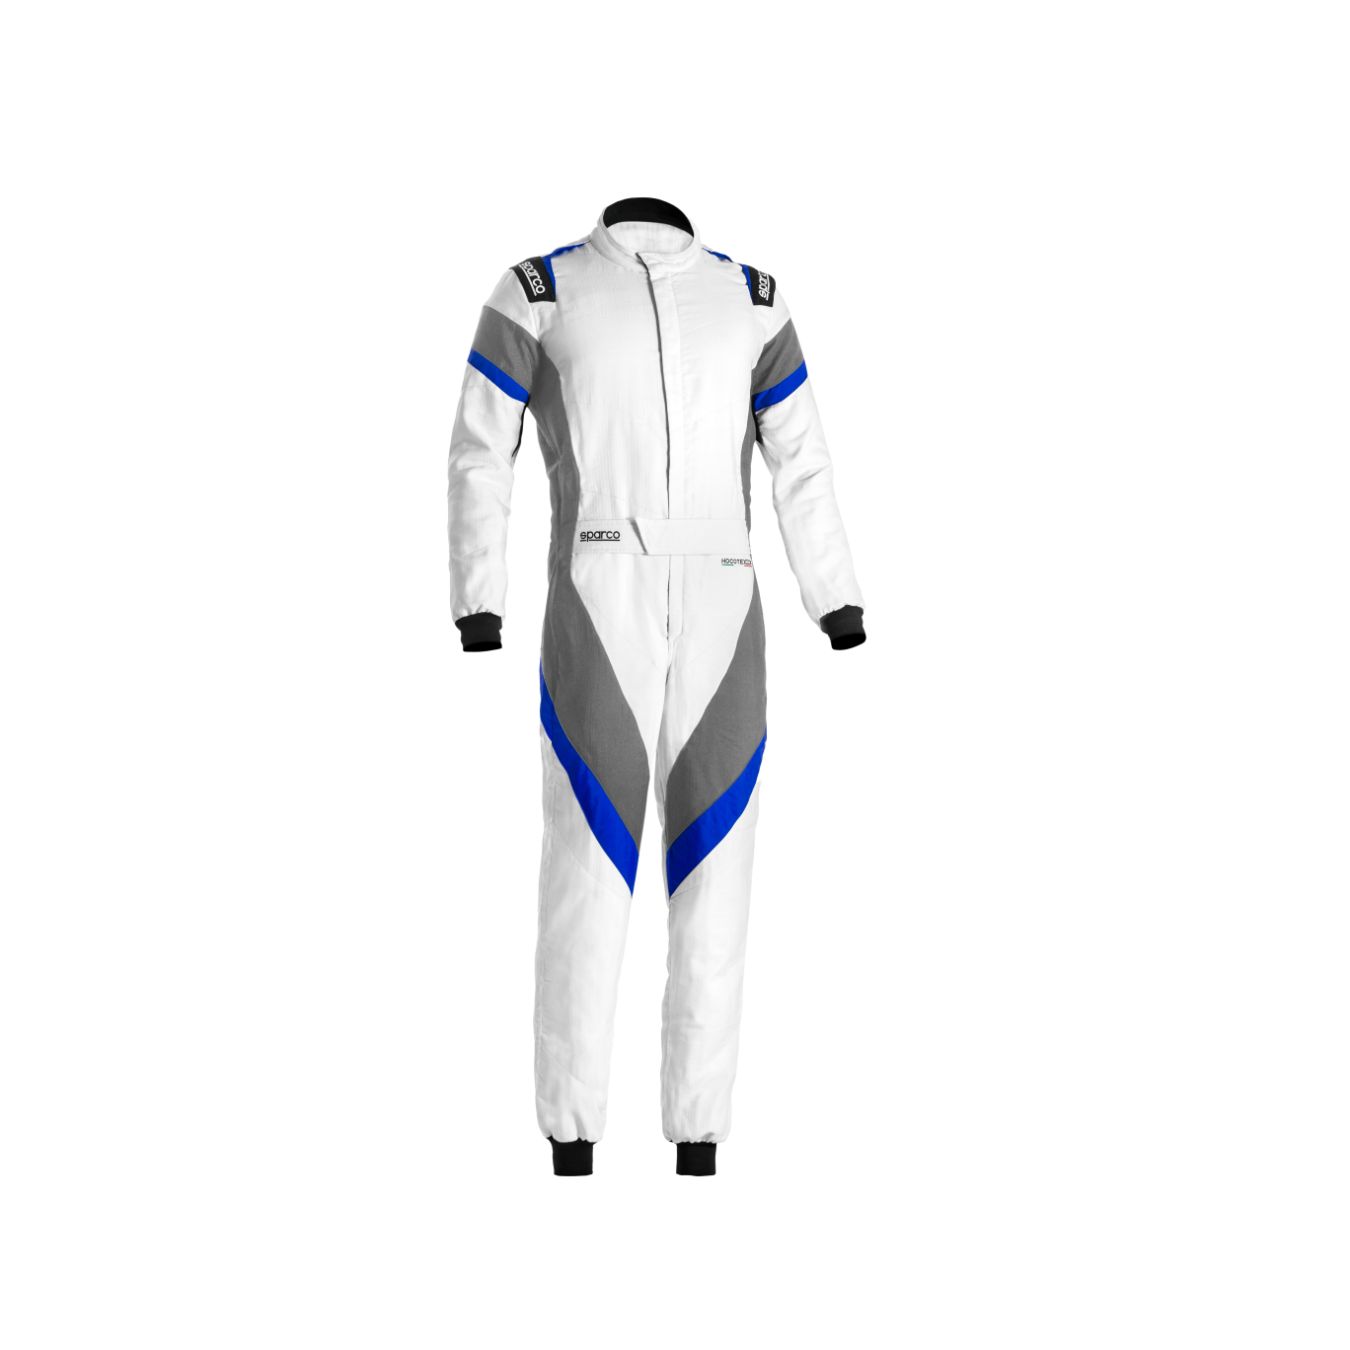 SPARCO ENERGY RS-5 SUIT FIA SIZE 52 BLAU FIA 8856-2000 OVERALL RACE RALLY 